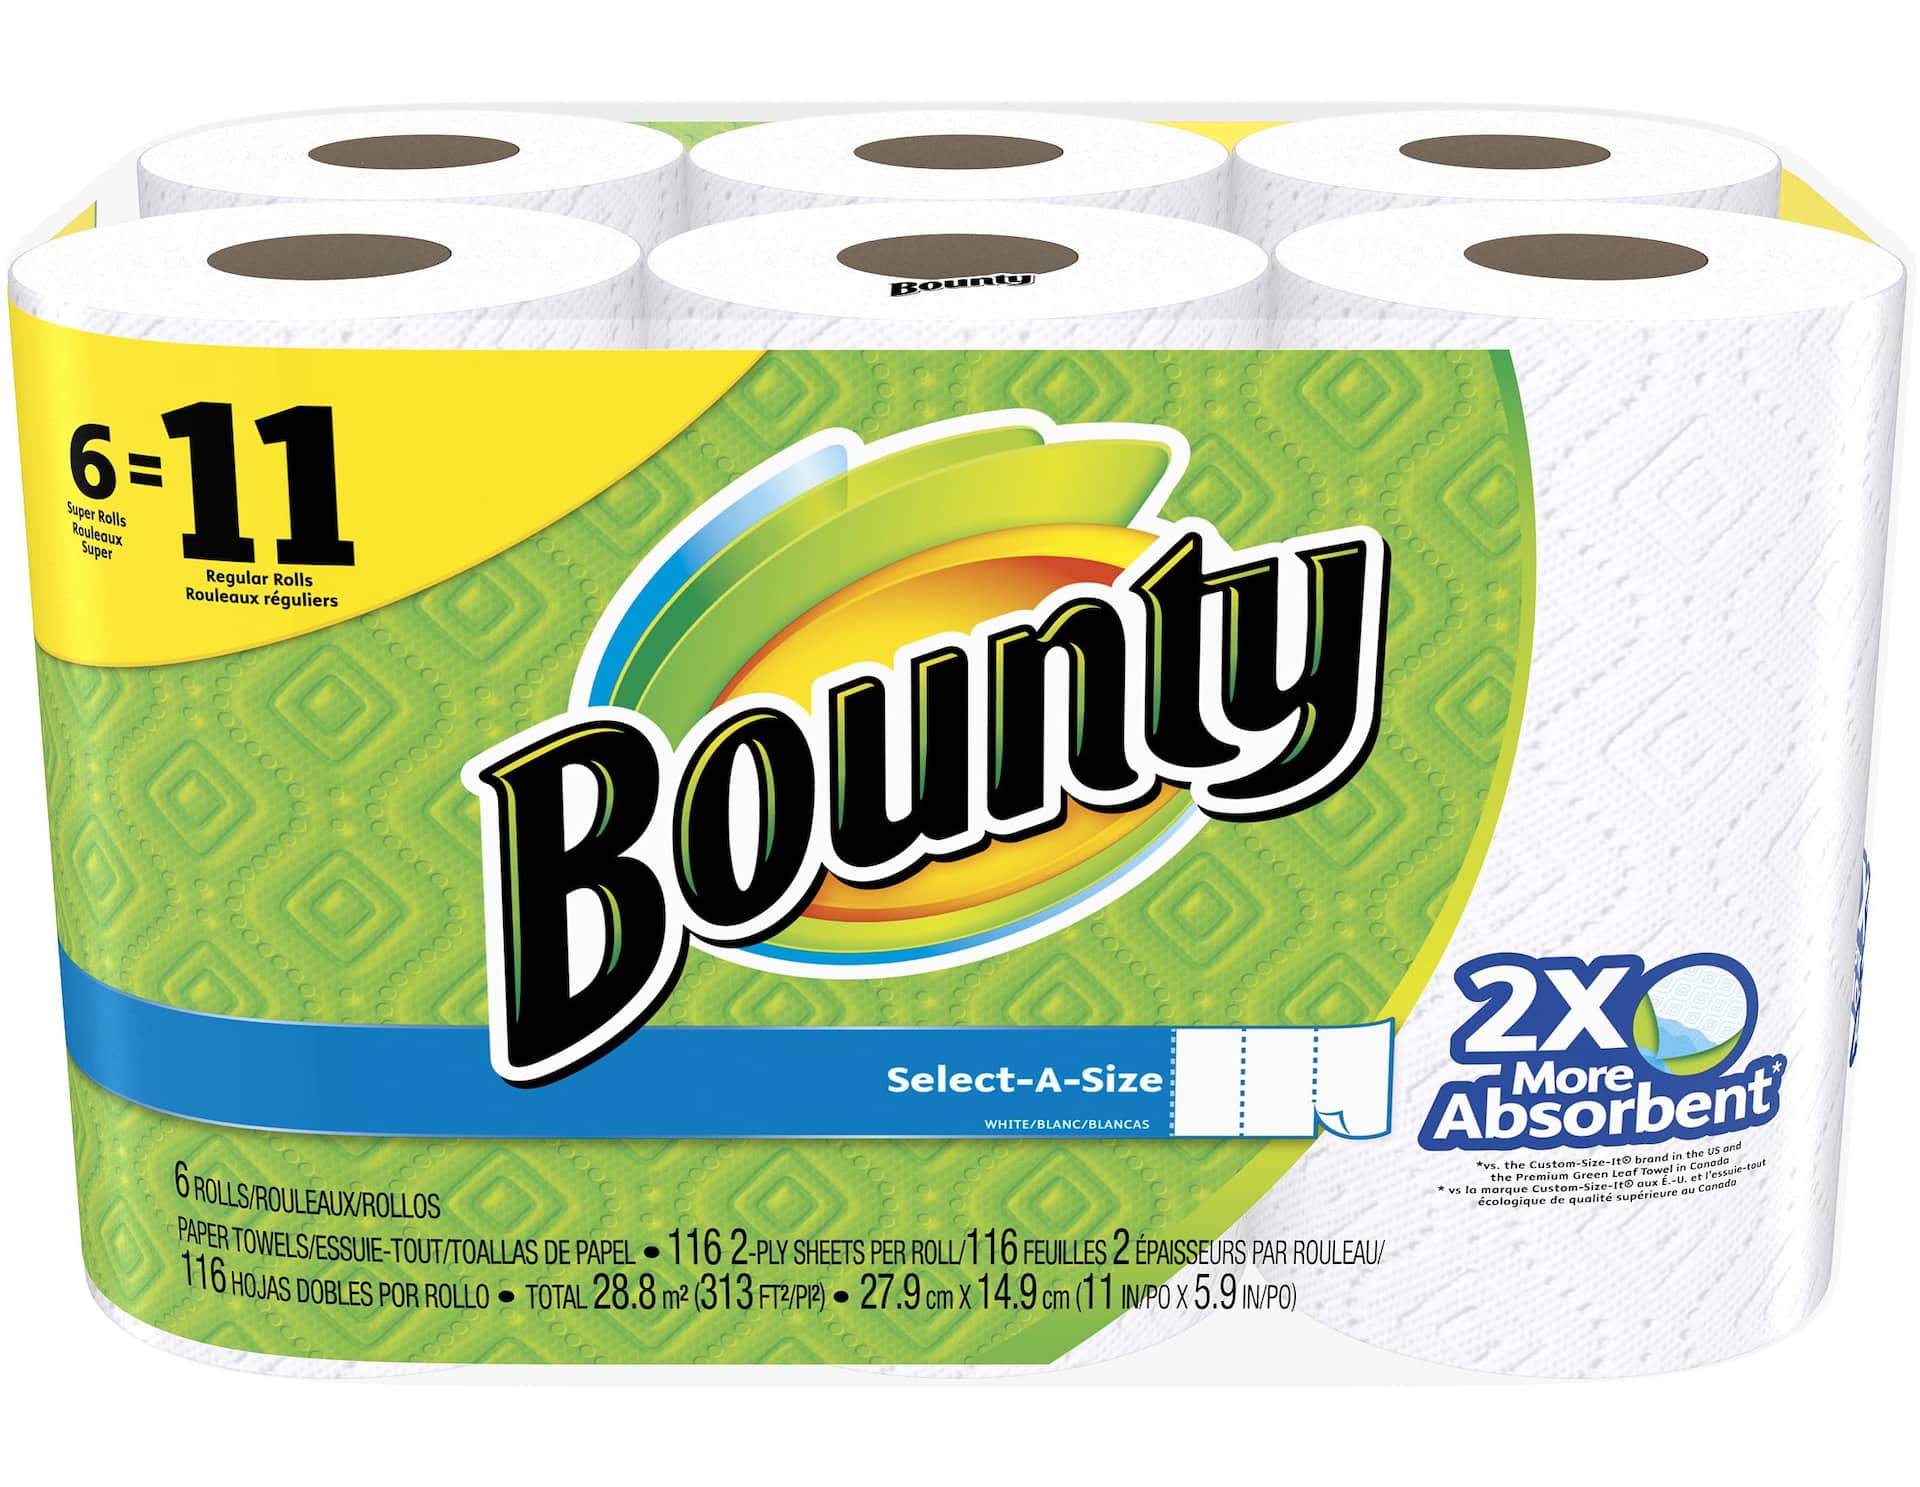 Charmin Ultra-Strong Double Roll Toilet Paper, 2-ply Tissue, 20-pk